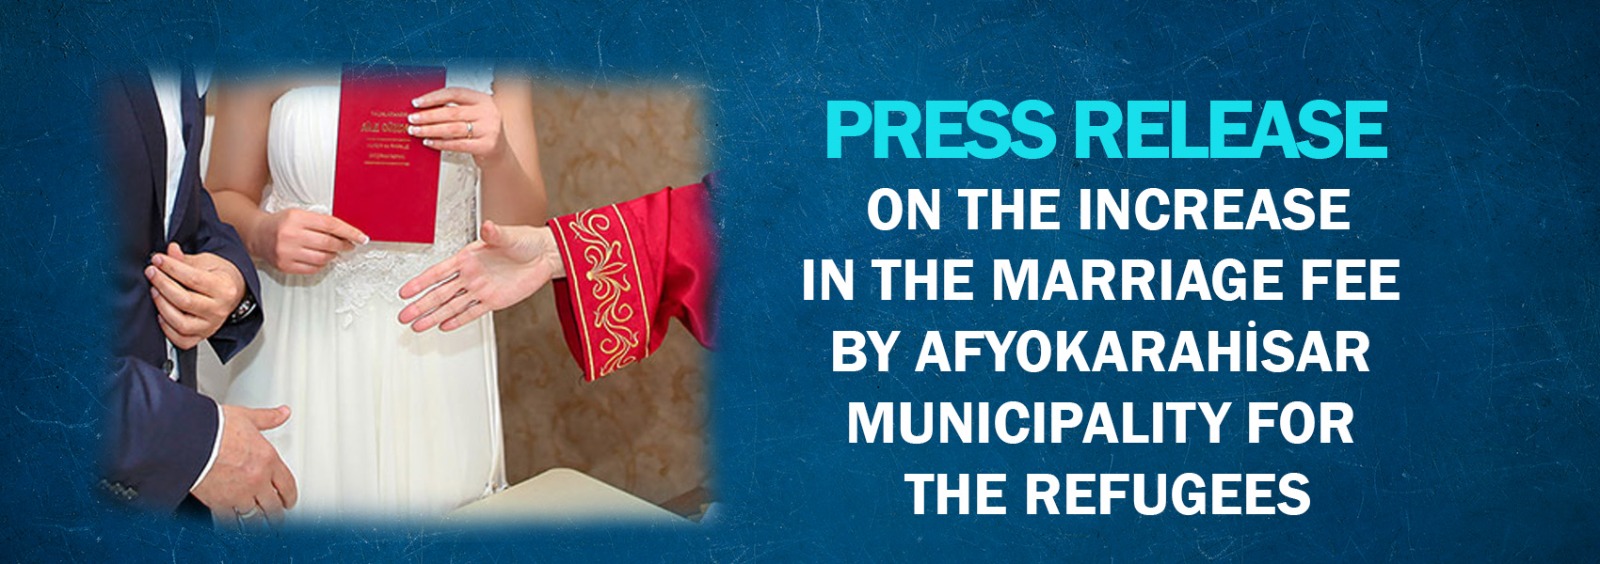 Press Release On The Increase In The Marriage Fee By Afyokarahisar Municipality For The Refugees